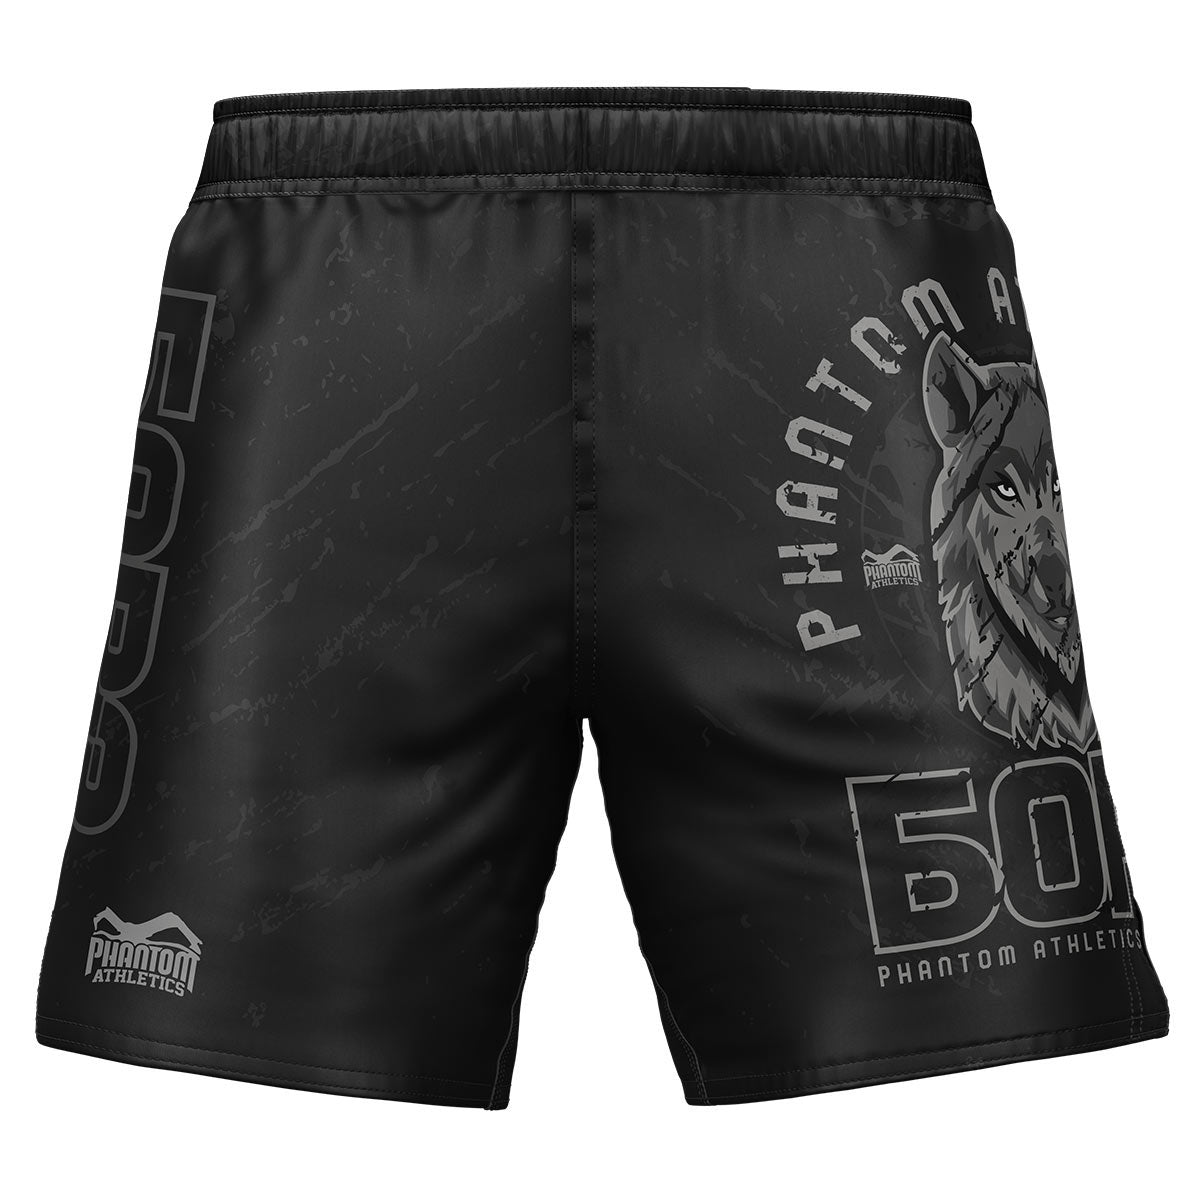 Phantom BORZ БОРЗ fight shorts. The ideal fight shorts for your martial arts. In Chechnya wolf design with Russian WOLF lettering. Perfect for MMA, Muay Thai, kickboxing, wrestling and grappling.